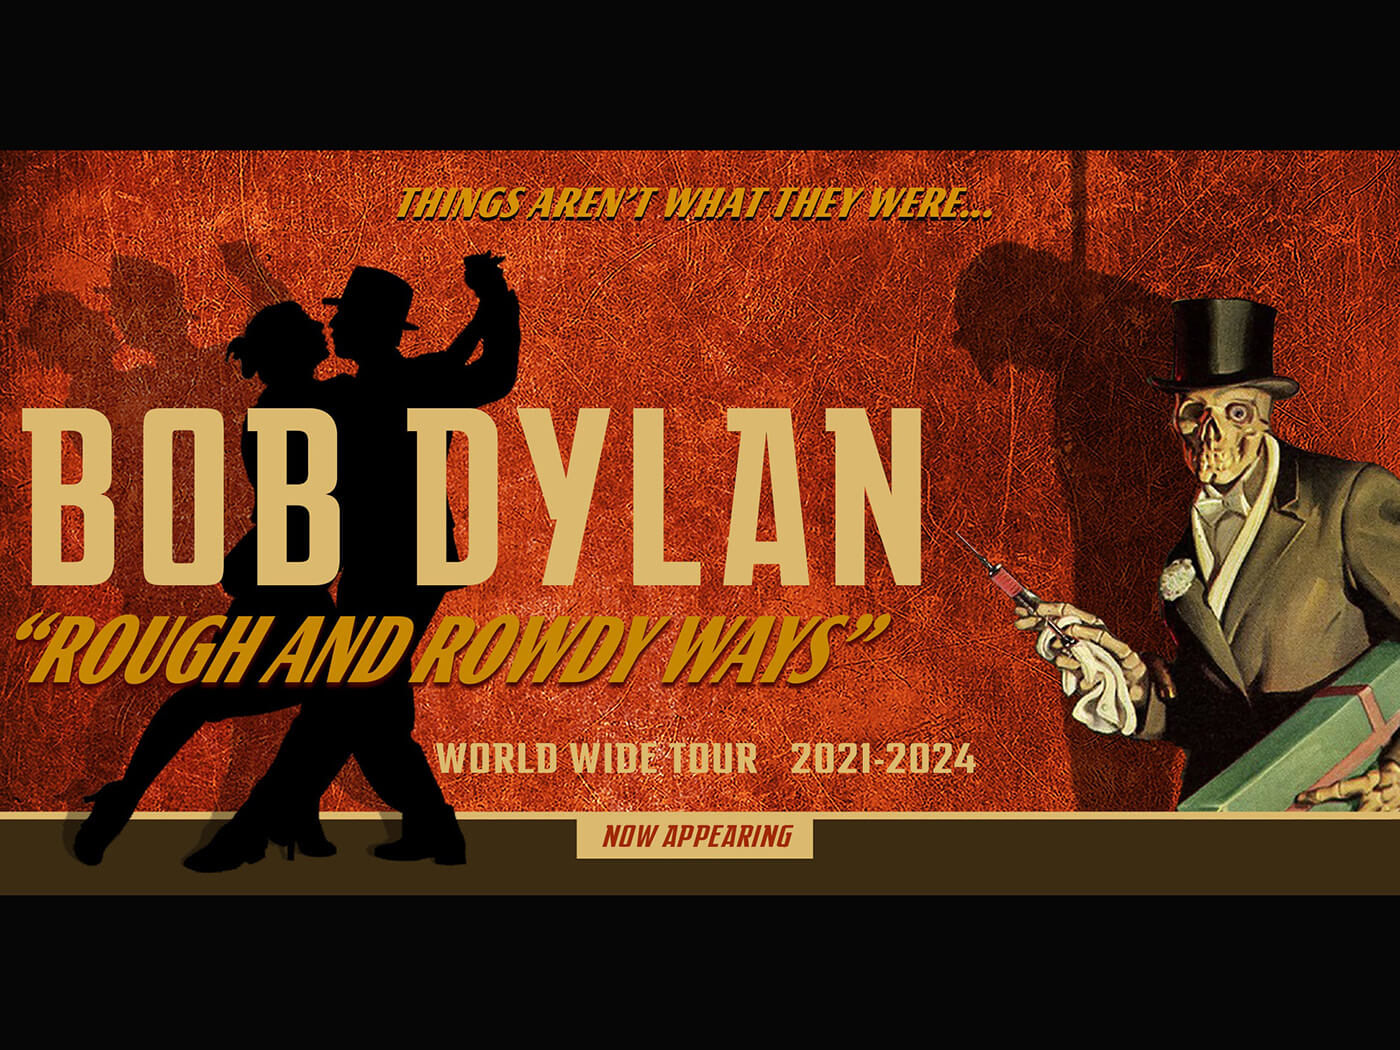 Bob Dylan’s Rough And Rowdy Ways Tour continues! Show 14: Brussels